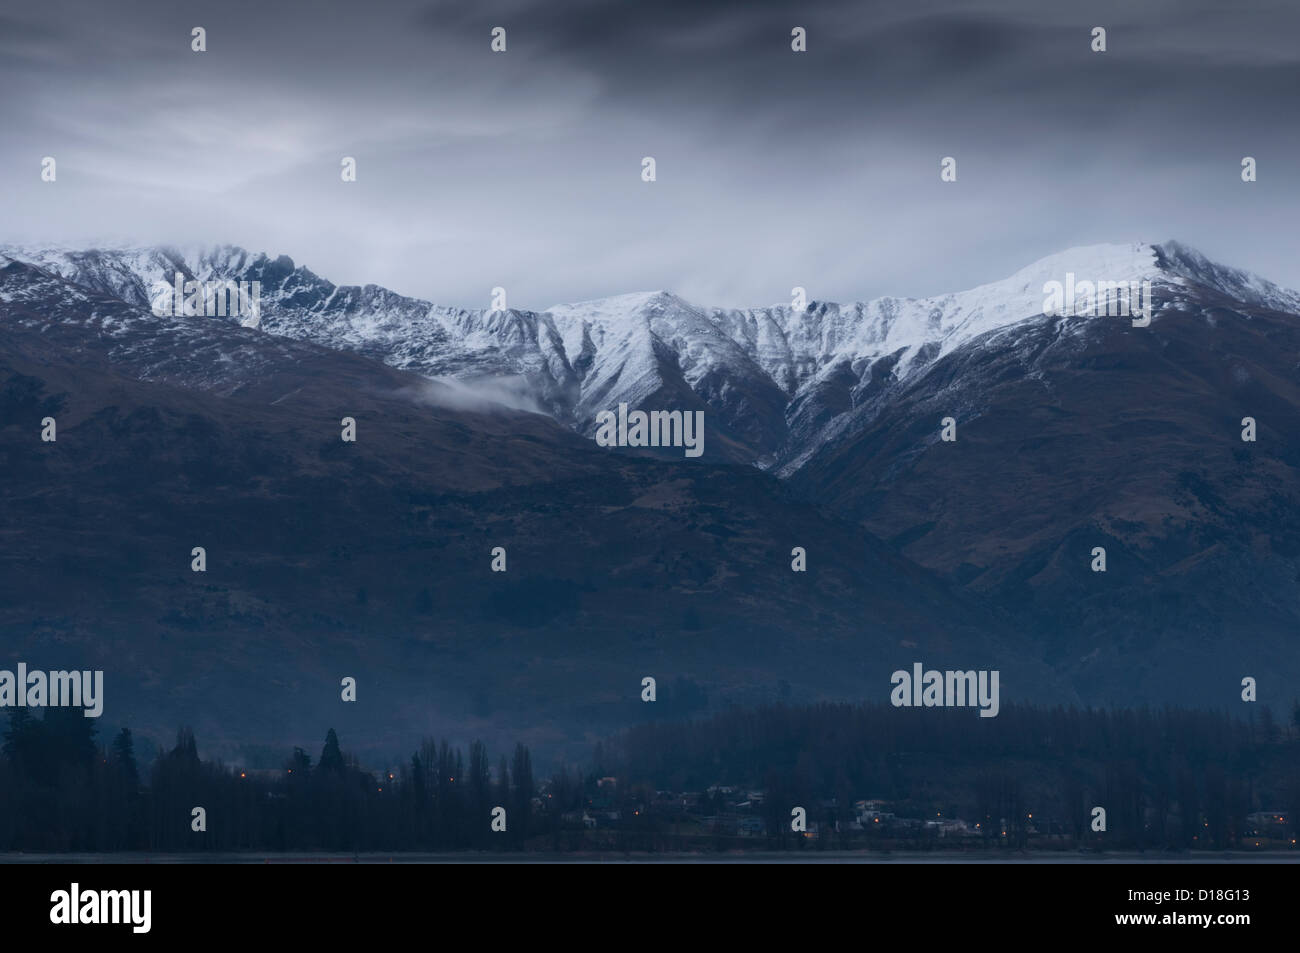 Clouds gathering over snowy mountains Stock Photo